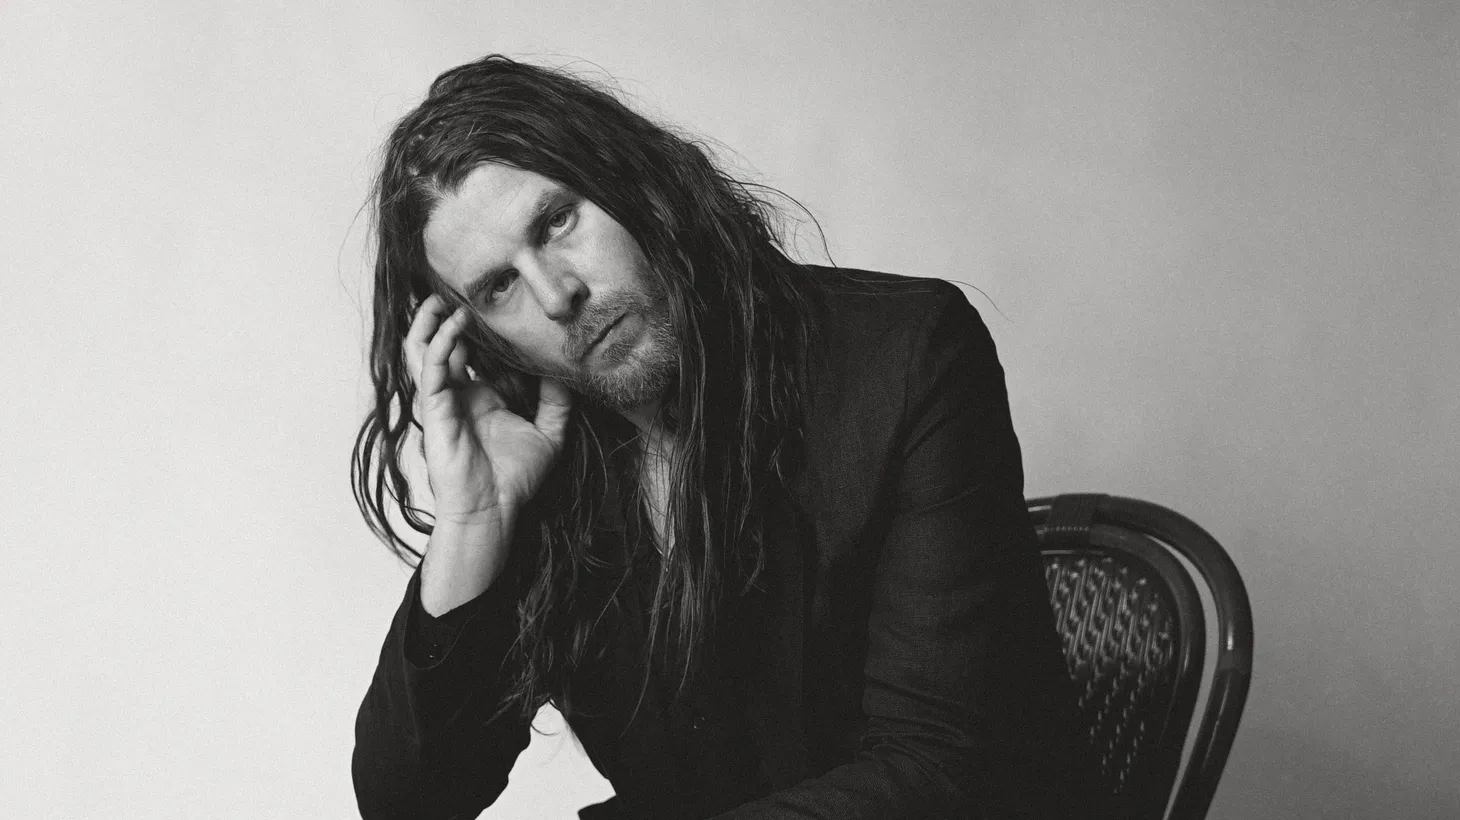 Beloved LA producer, multi-instrumentalist, and songwriter Jonathan Wilson will release his latest album in September, and we’ve got an early listen to “Charlie Parker” to share as a treat.